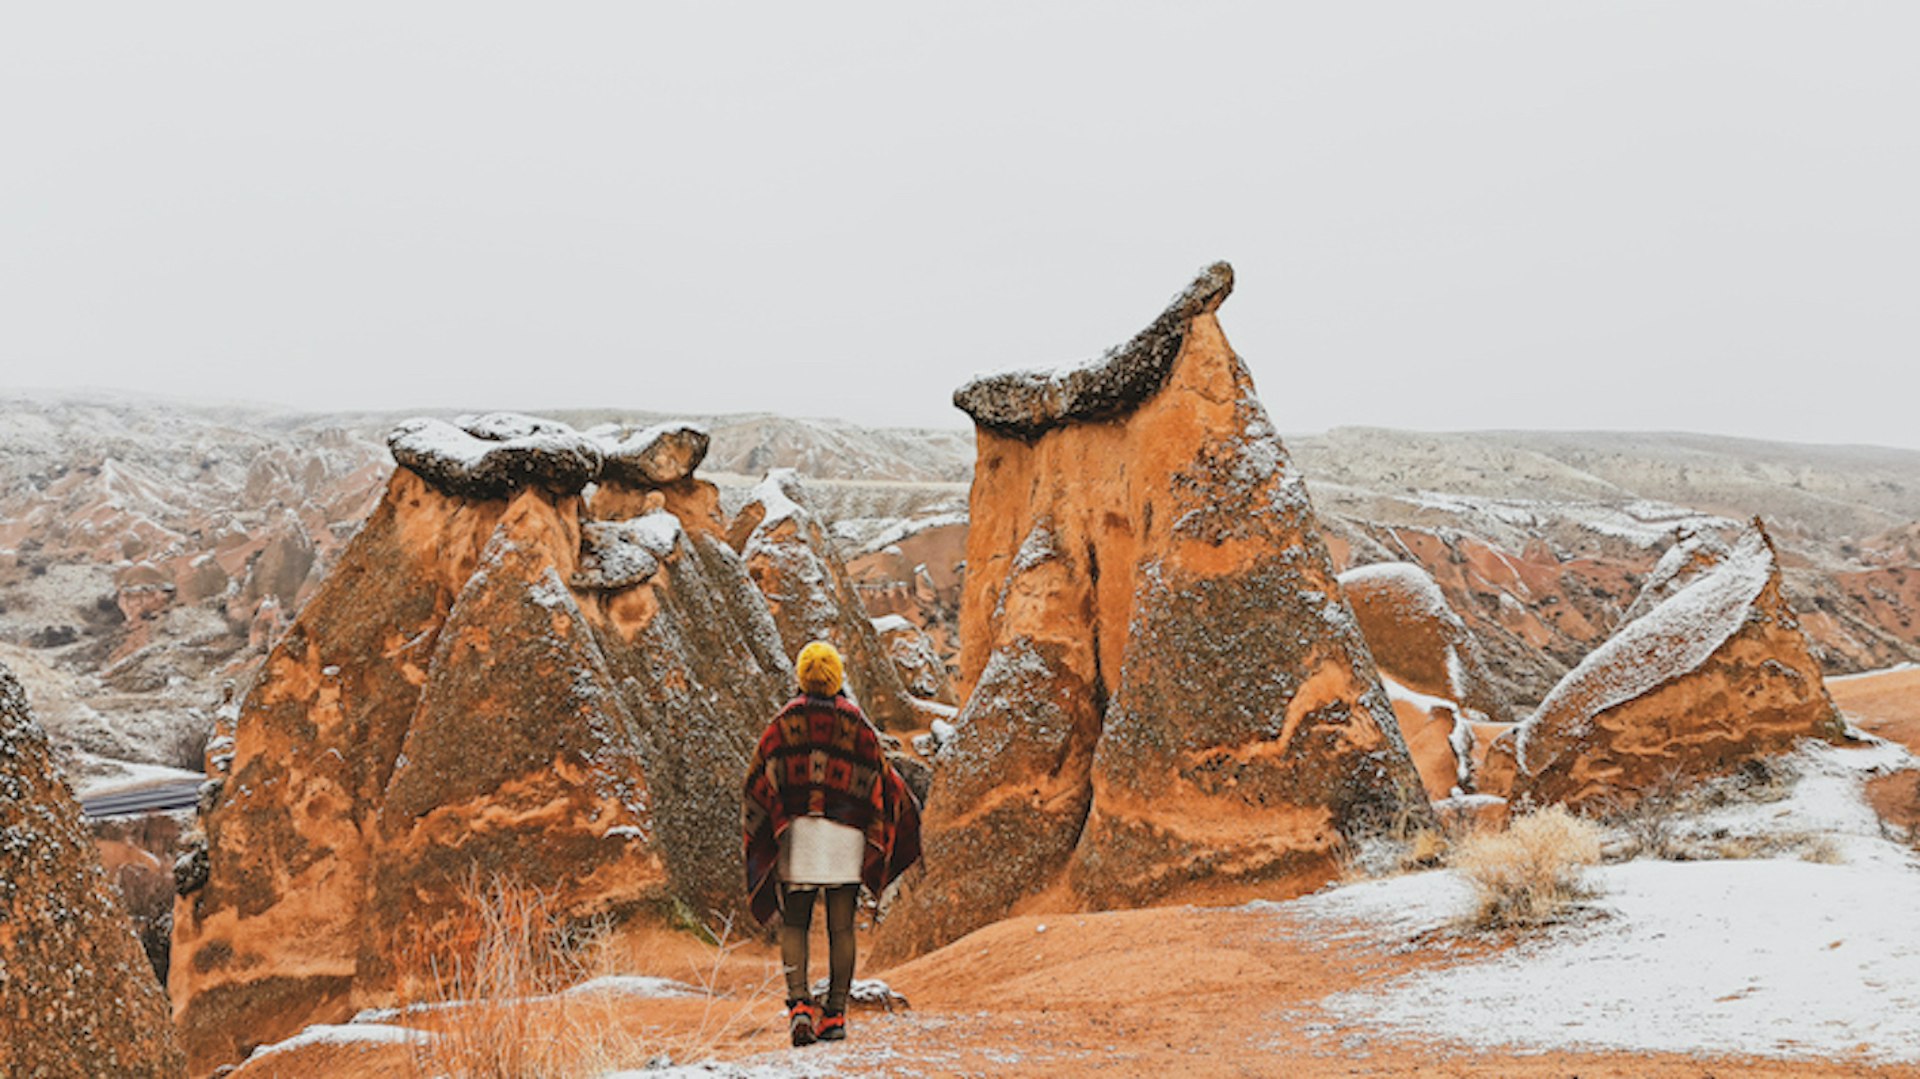 A woman walking around Fairy chimneys surrounded by snow in Imaginary Valley in winter season in Cappadocia.